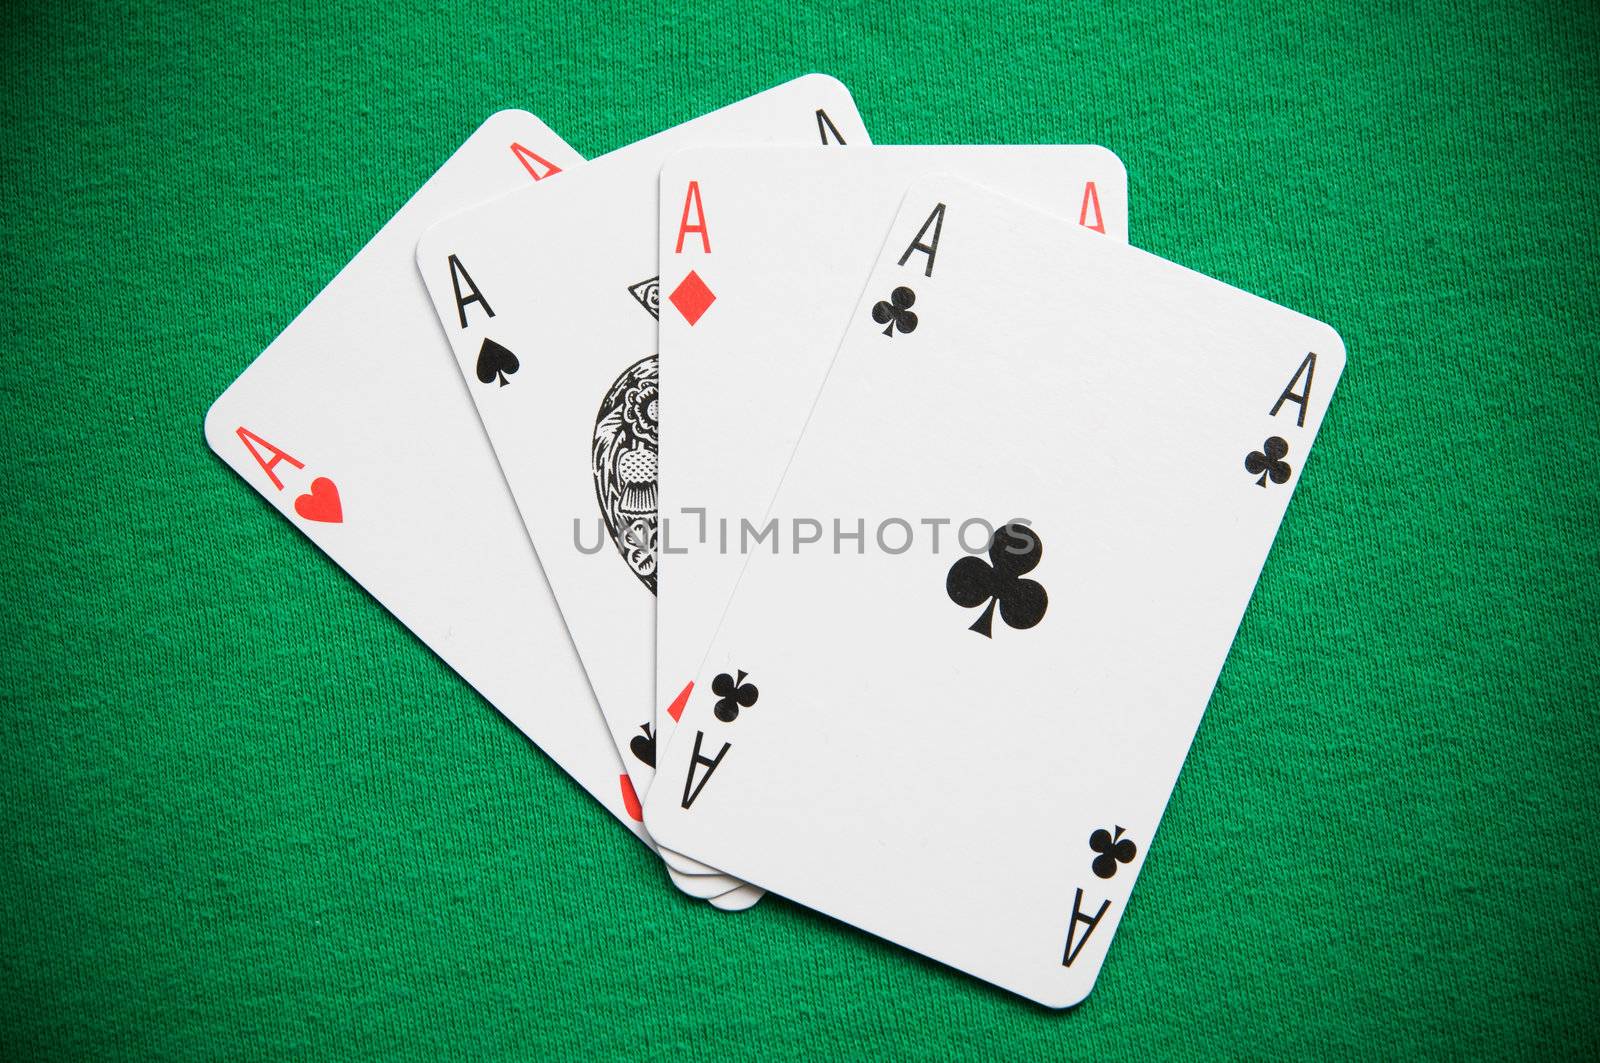 

A Colourful Photo of a Hand of Aces